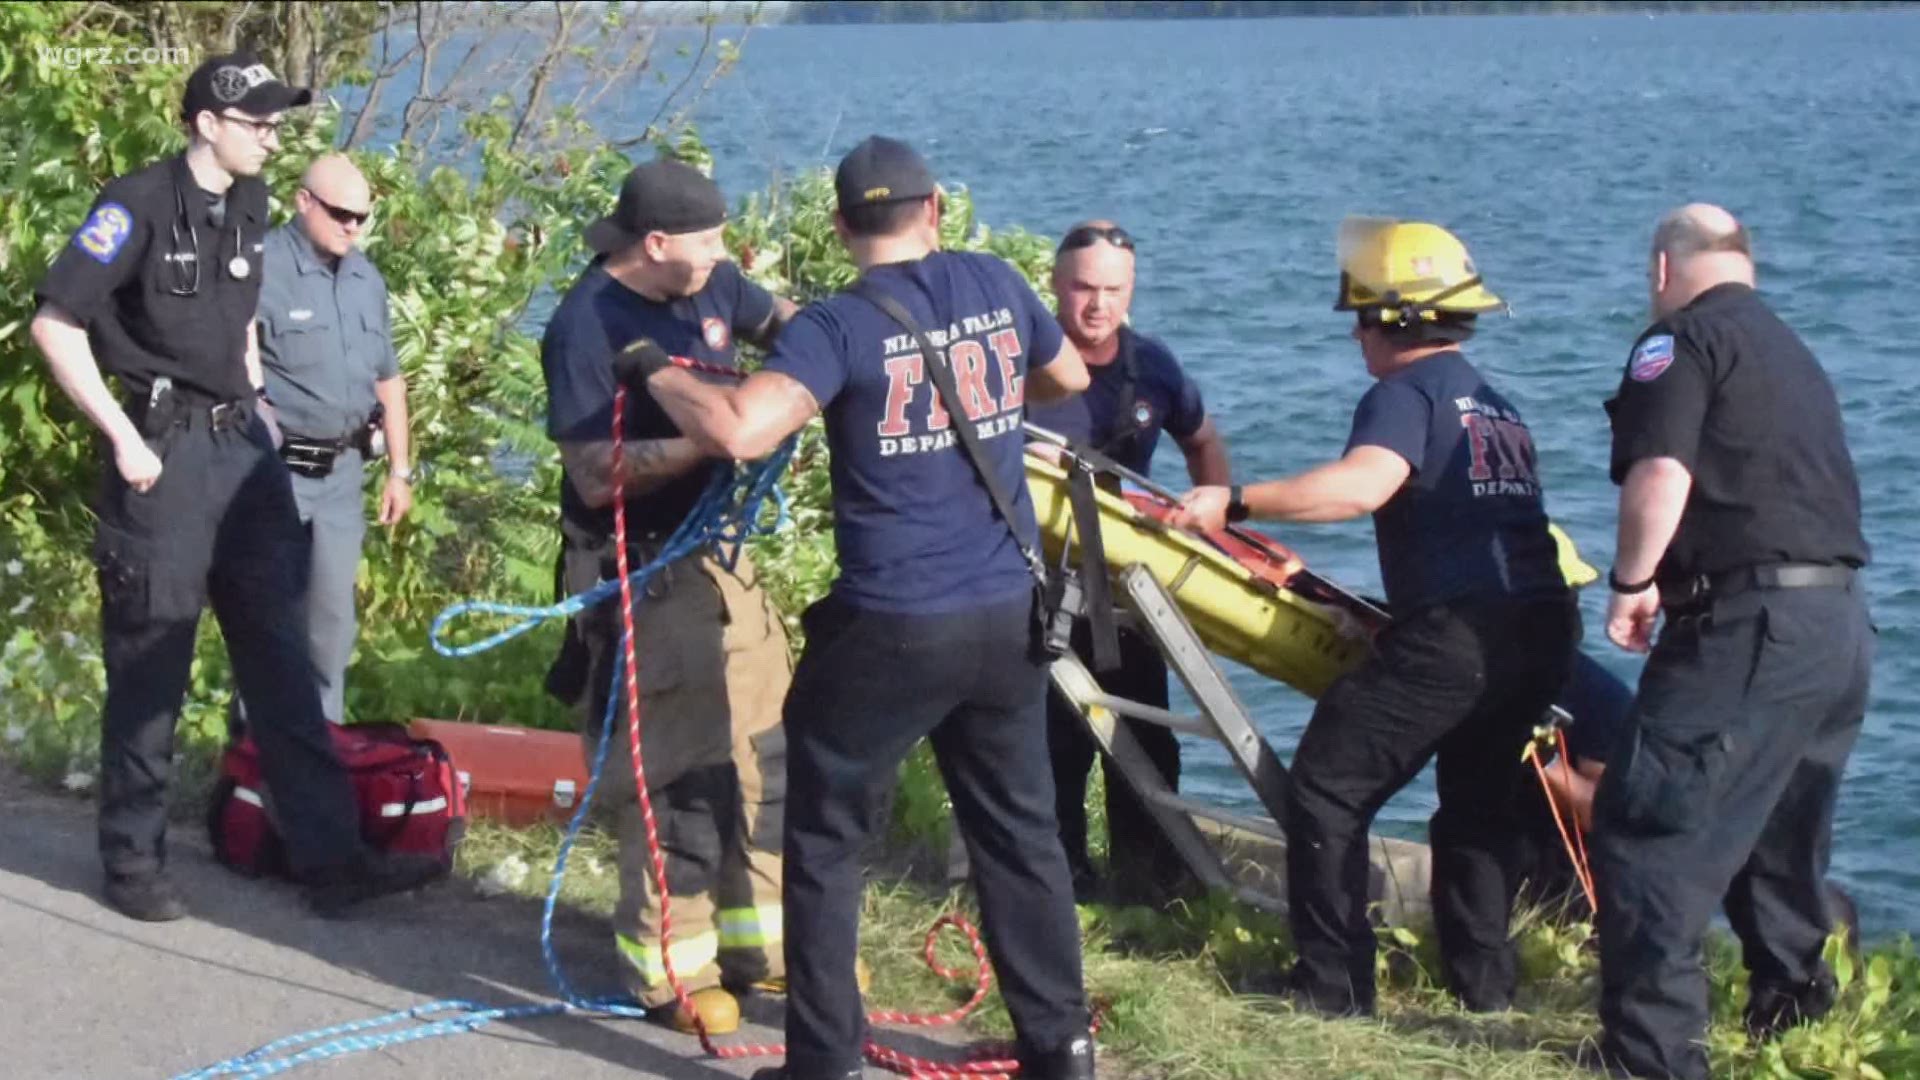 According to Niagara Falls Fire officials, the woman fell down the 10-foot, steep embankment and landed on the rocks.